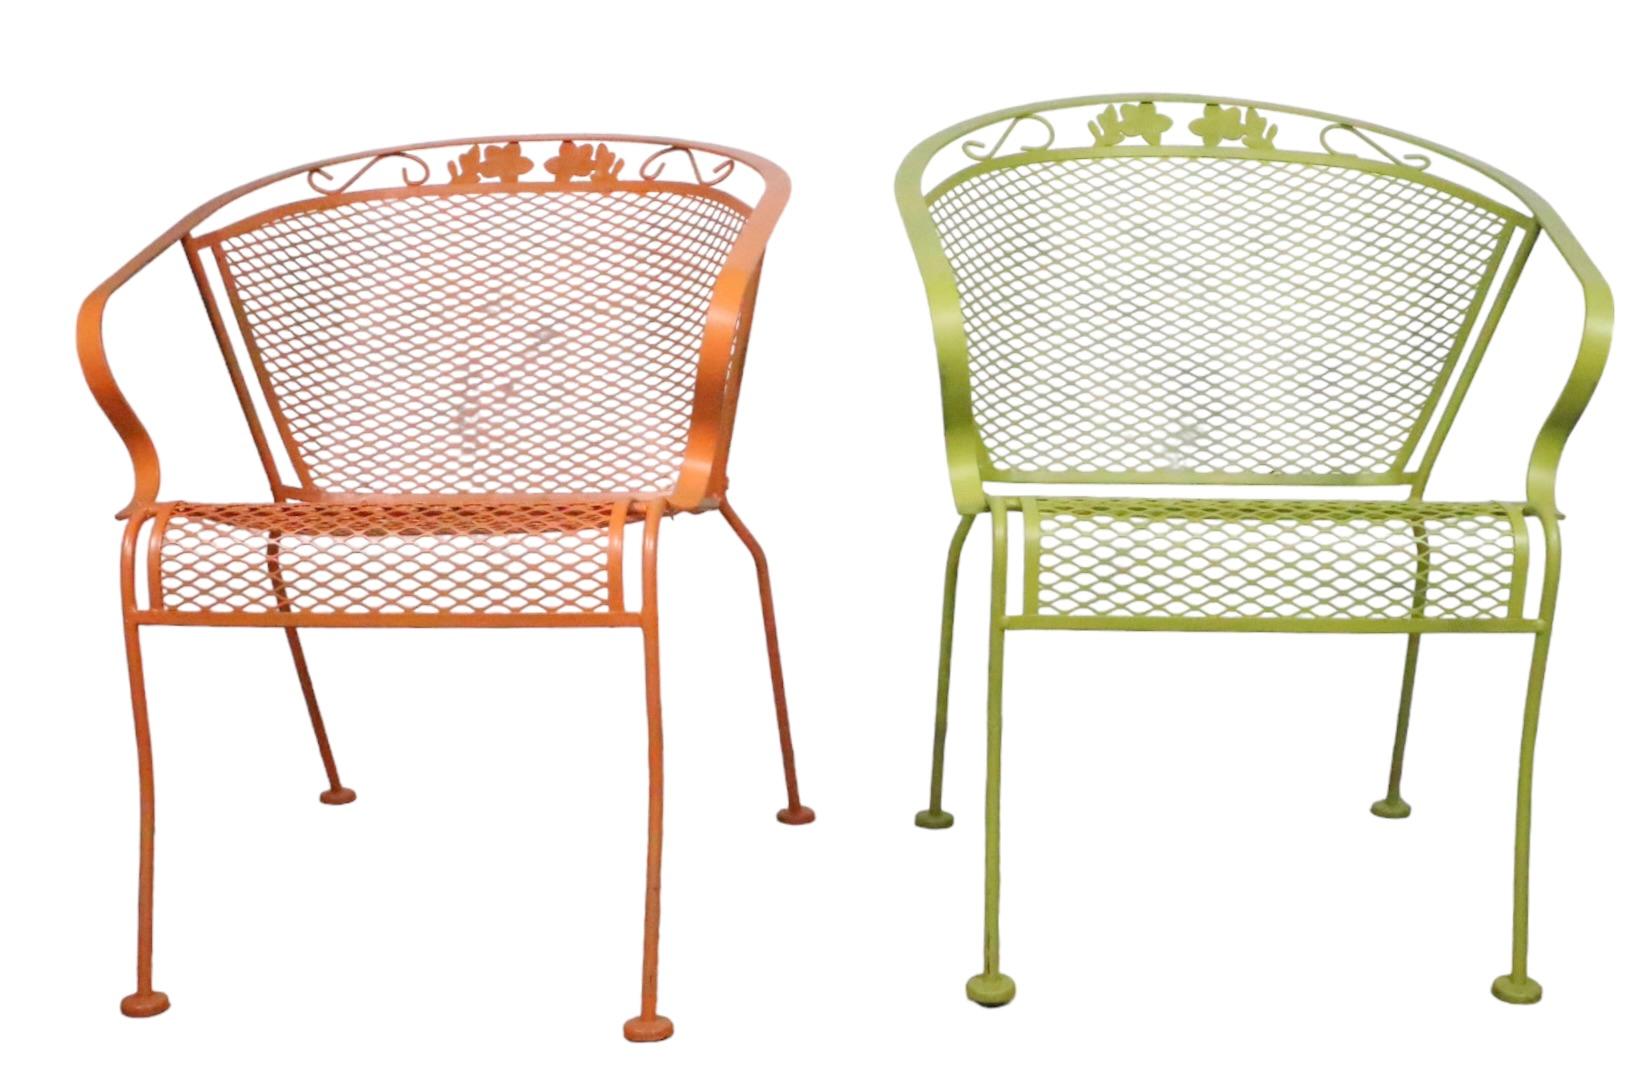 Fun set of three vintage garden, patio, poolside chairs, having a wrought iron frame. with metal mesh seats and backs. The chairs are turquoise, orange and green. All are structurally sound and sturdy, all show minor cosmetic wear to the paint